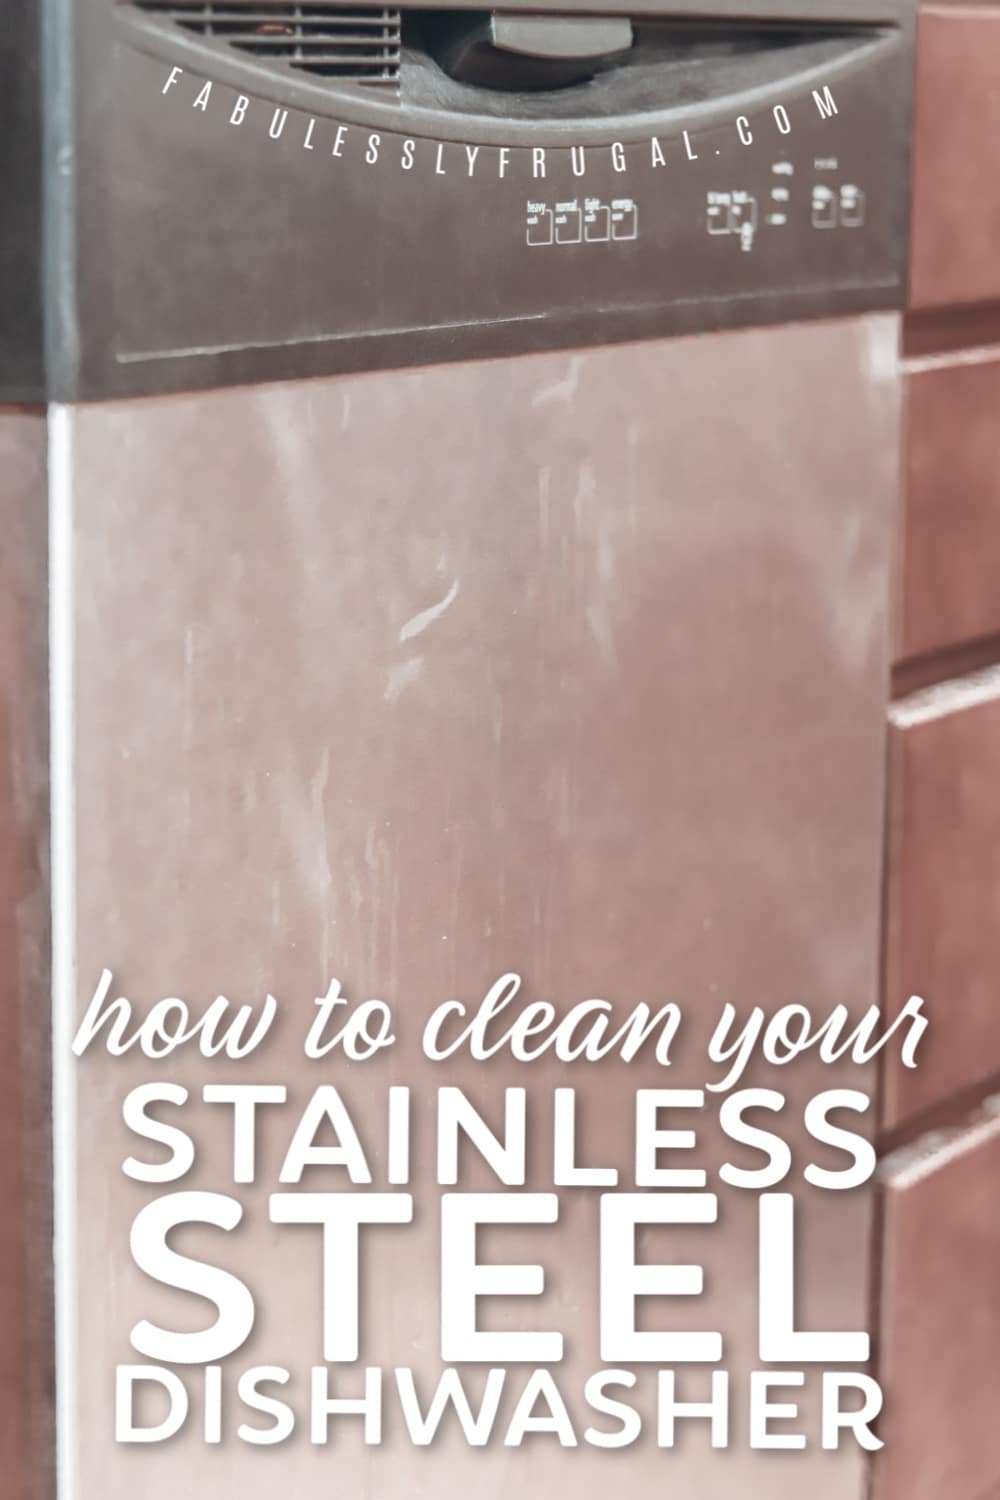 How to clean your stainless steel dishwasher